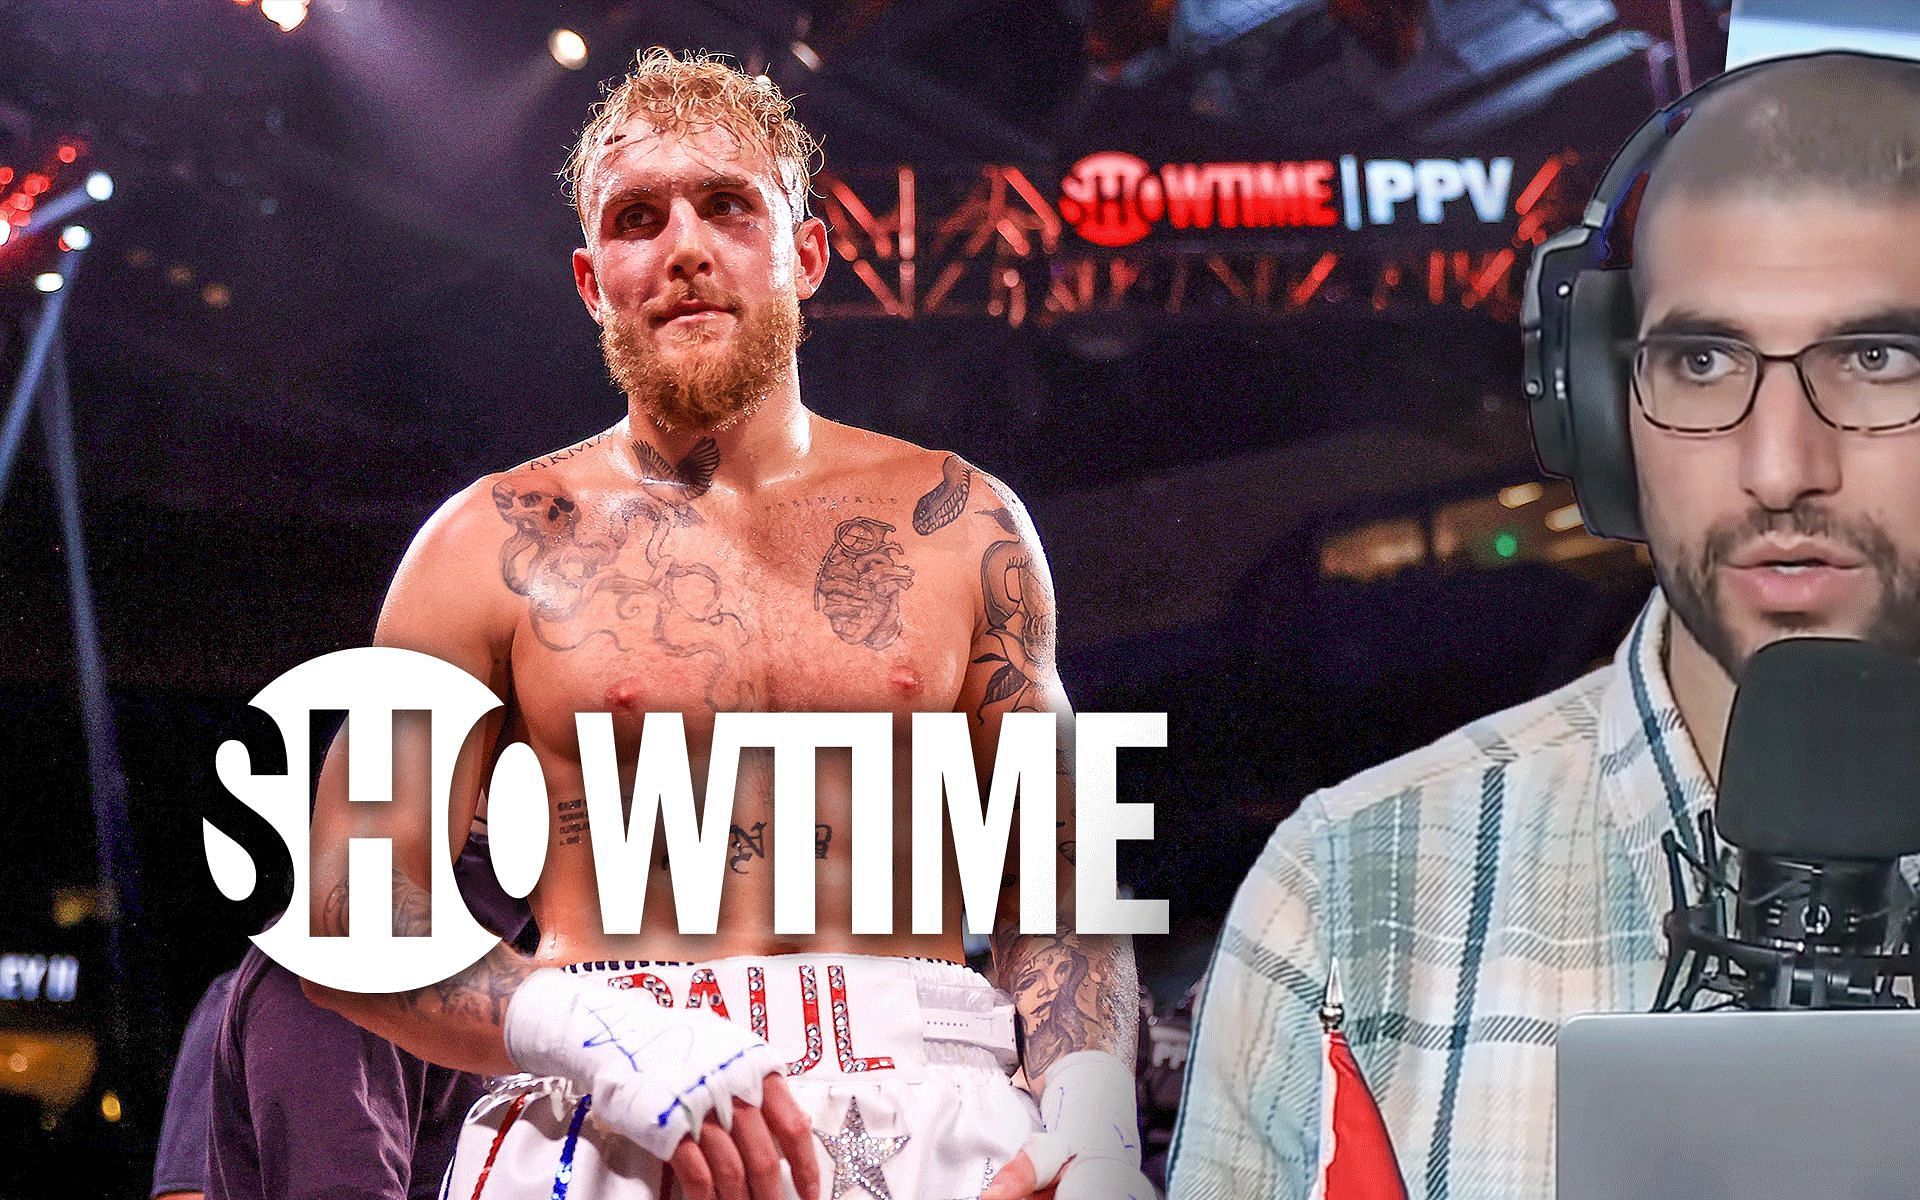 Ariel Helwani says Jake Paul's Showtime deal is done